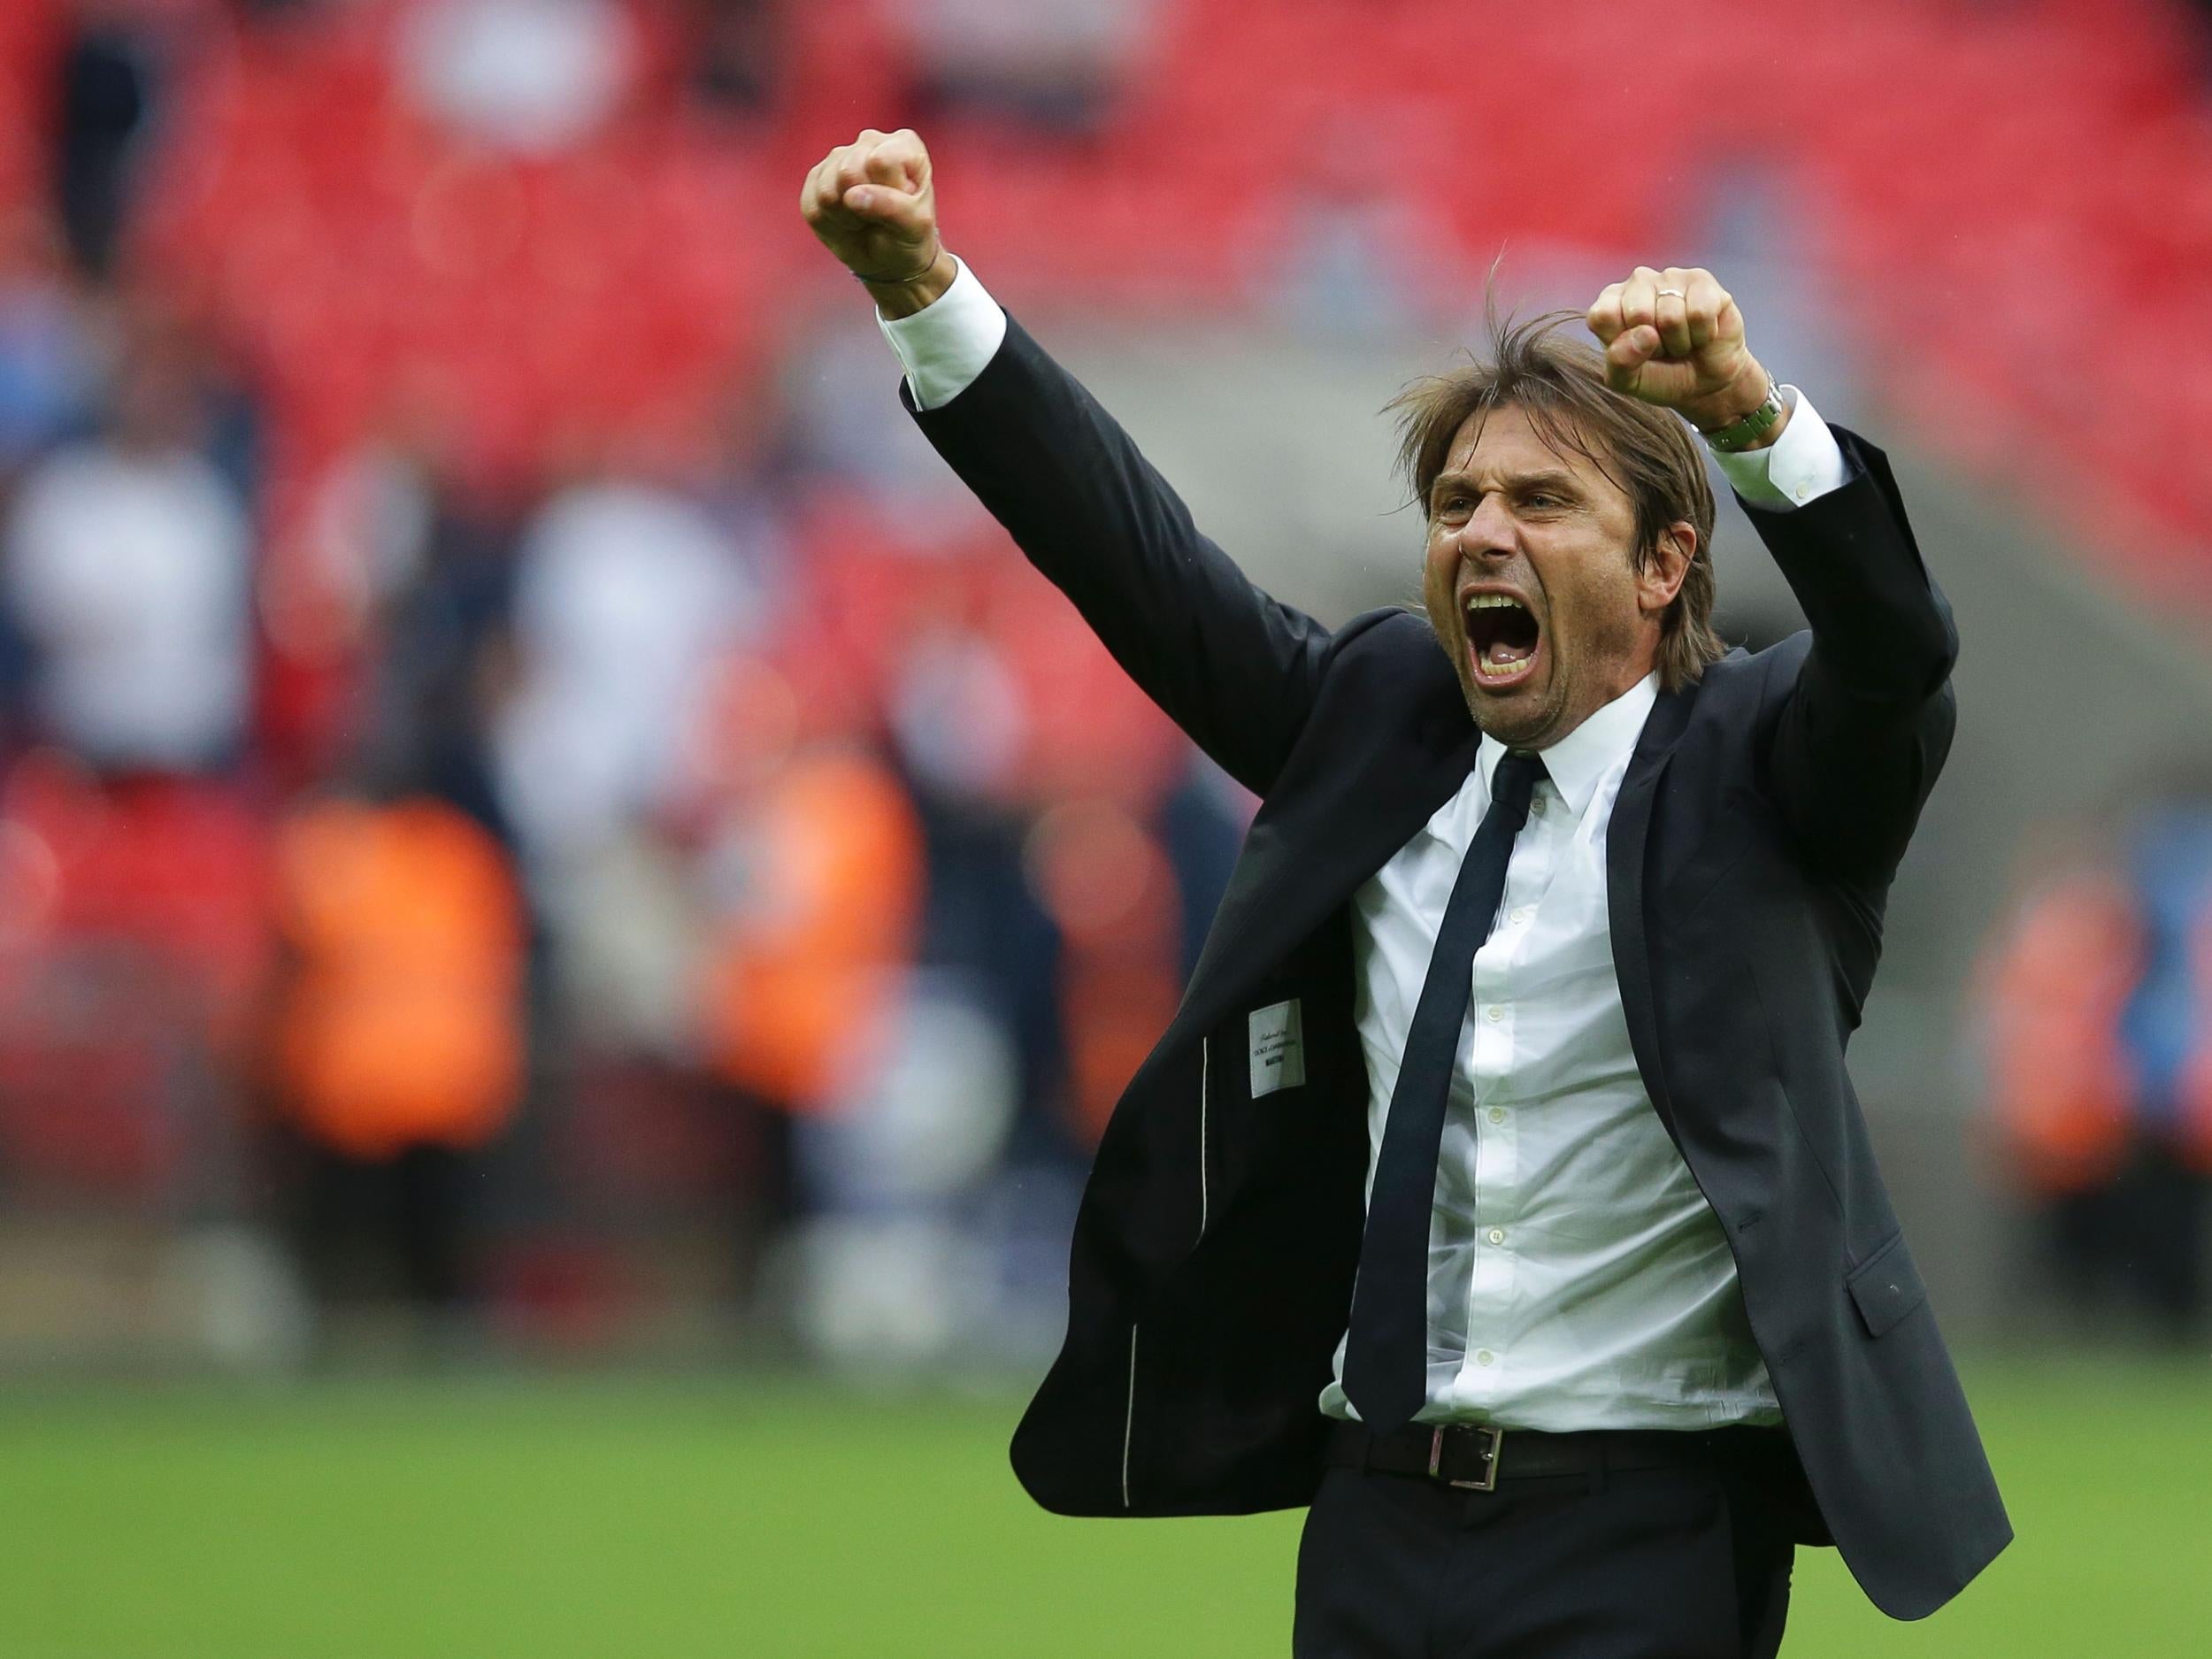 Conte is happy to not be mentioned as title favourites yet